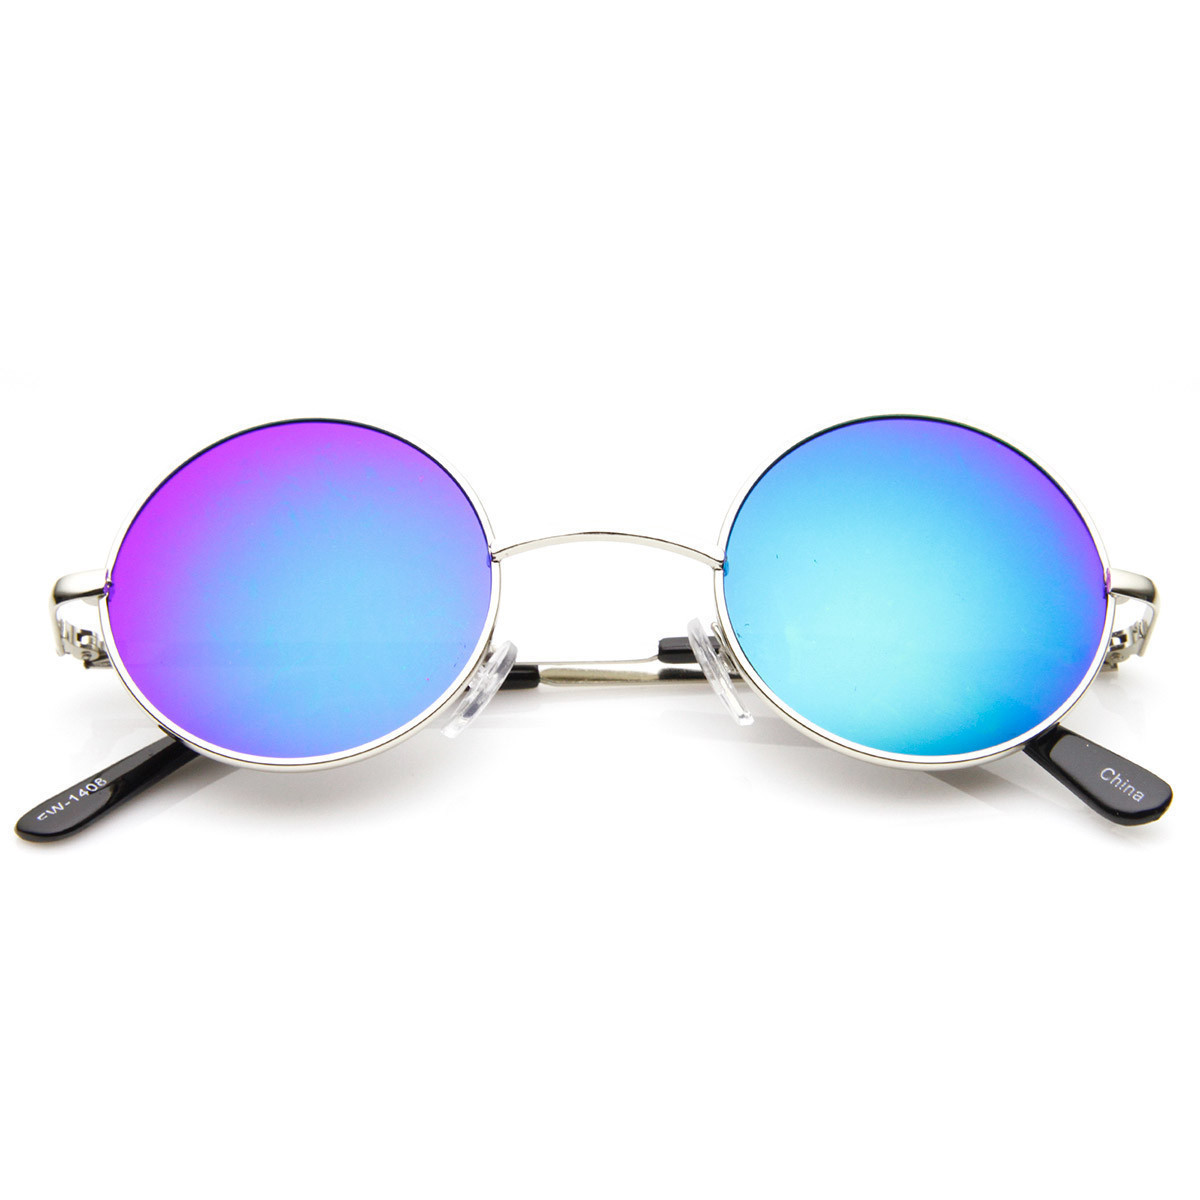 Lennon Style Round Circle Metal Sunglasses With Color Mirror Lens - 1408 - 4-Pack